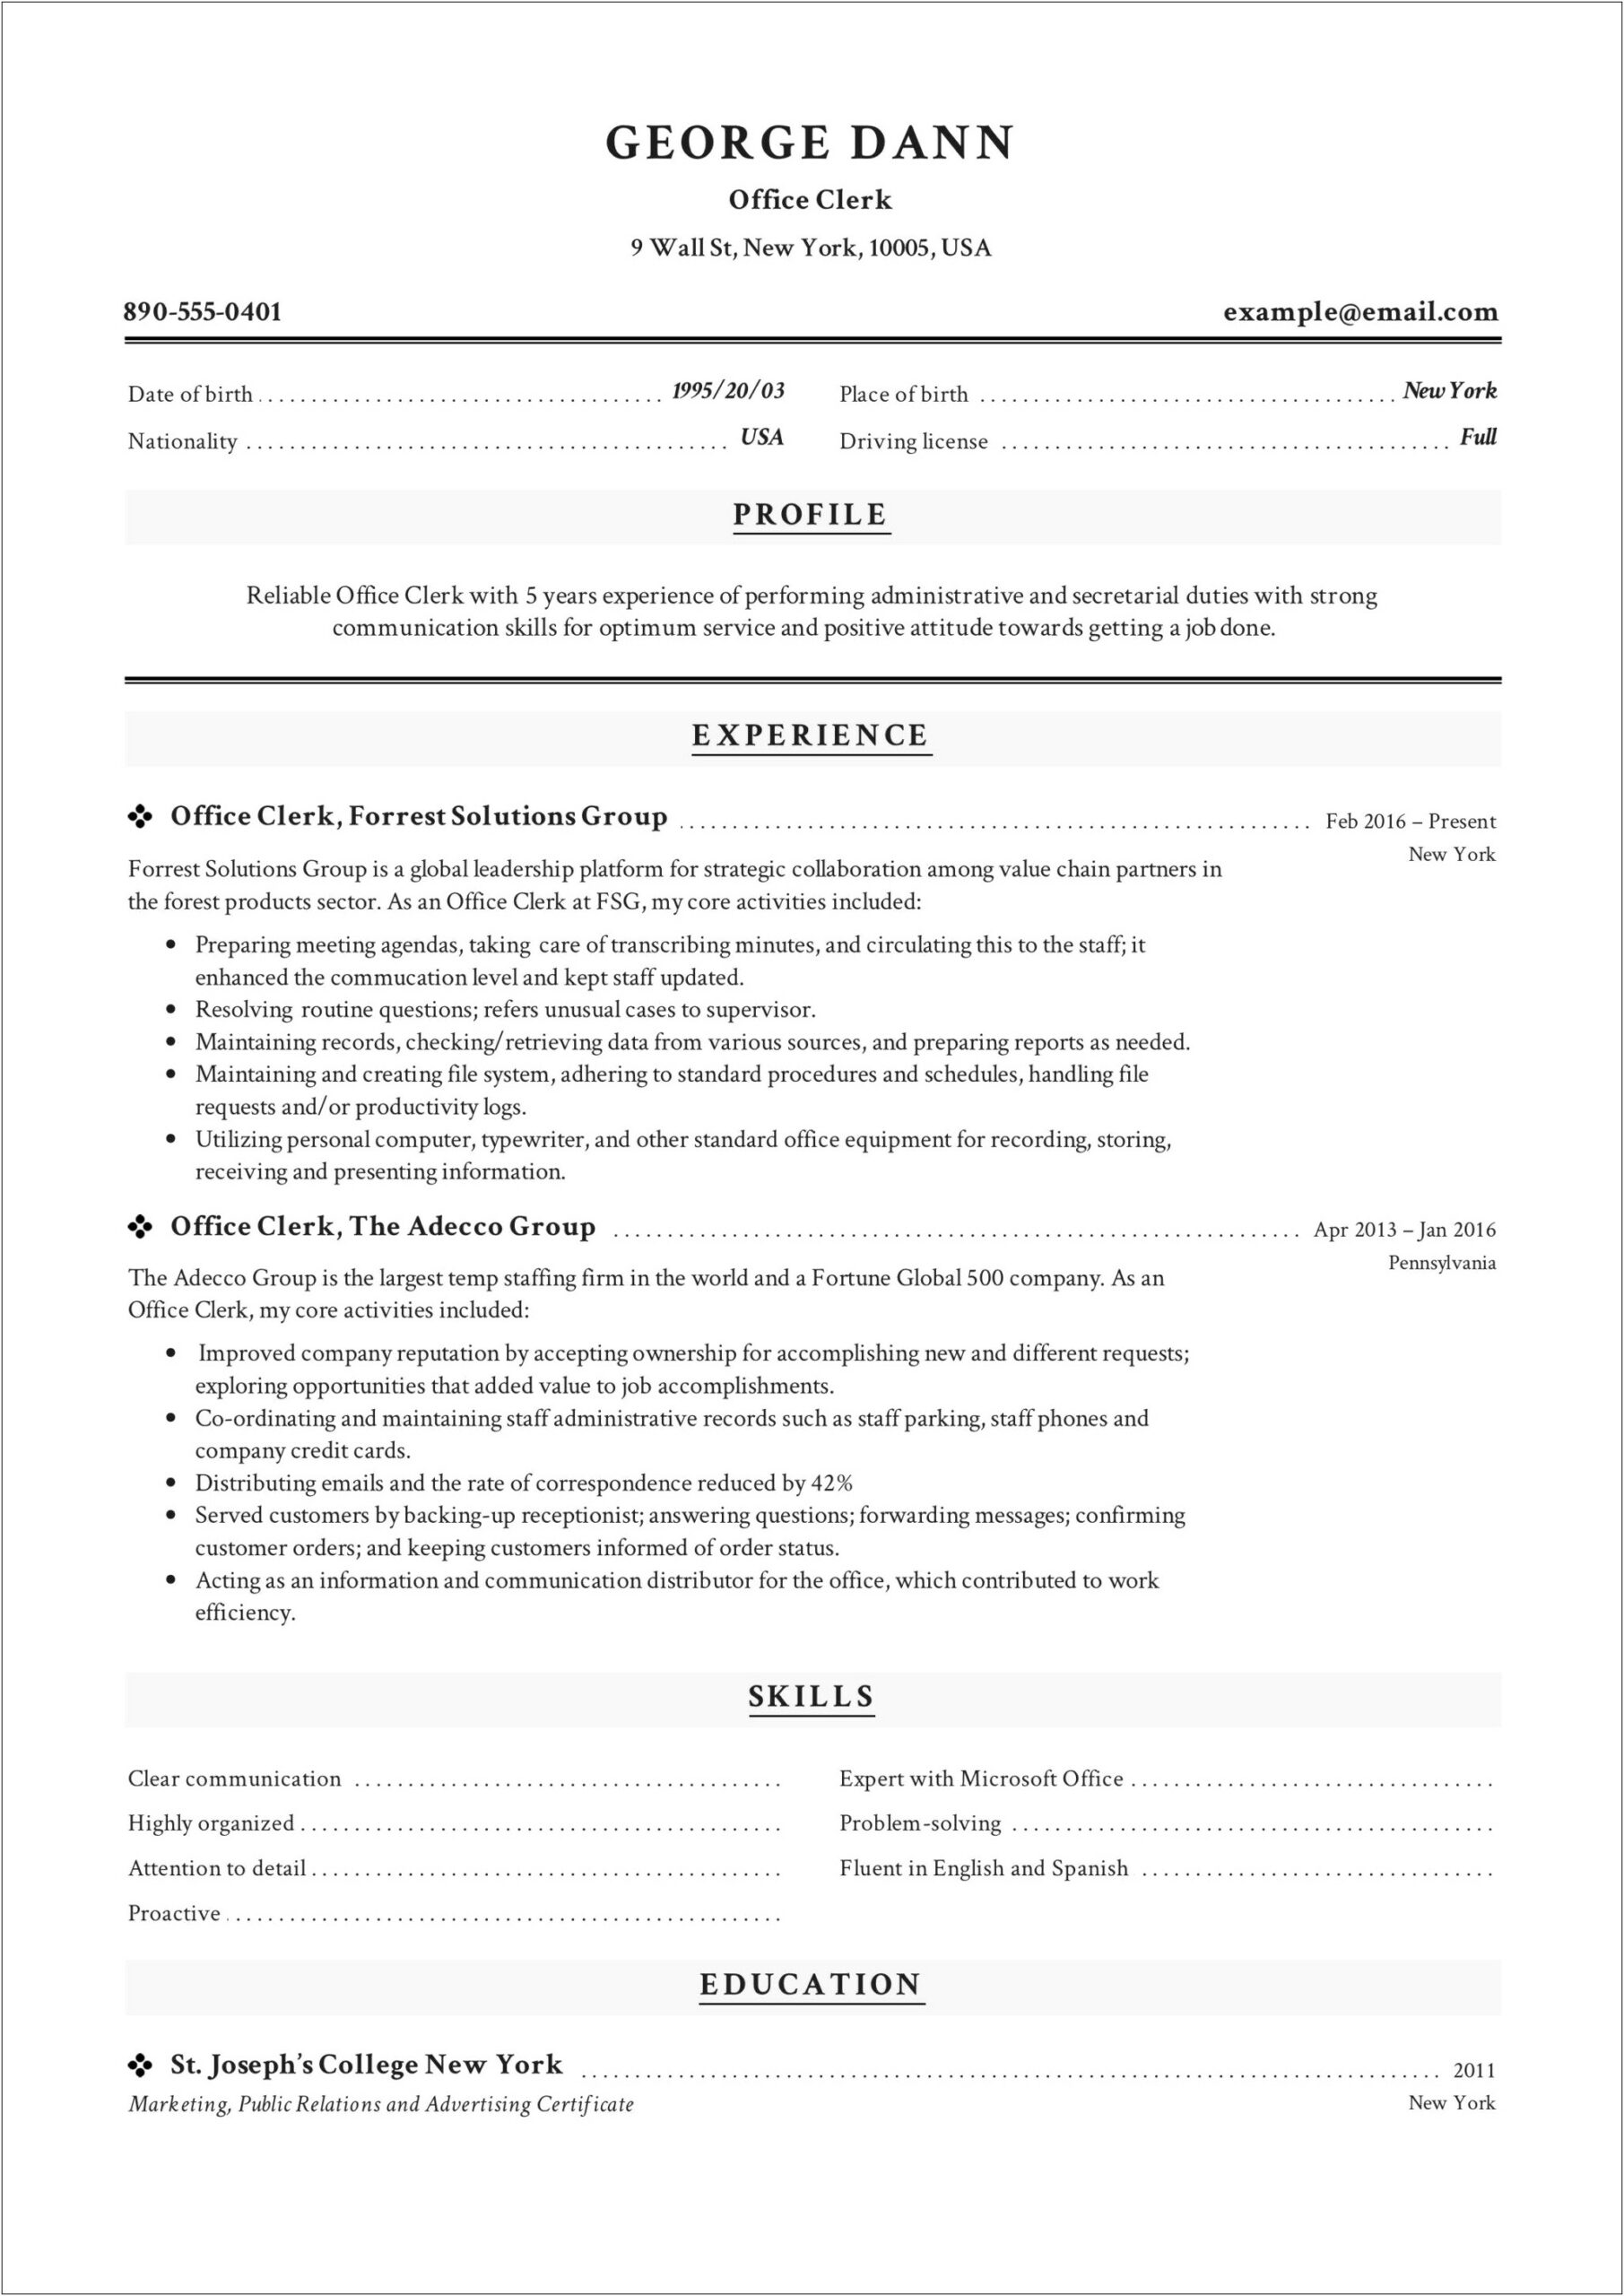 Resume Summary Examples For Office Clerk